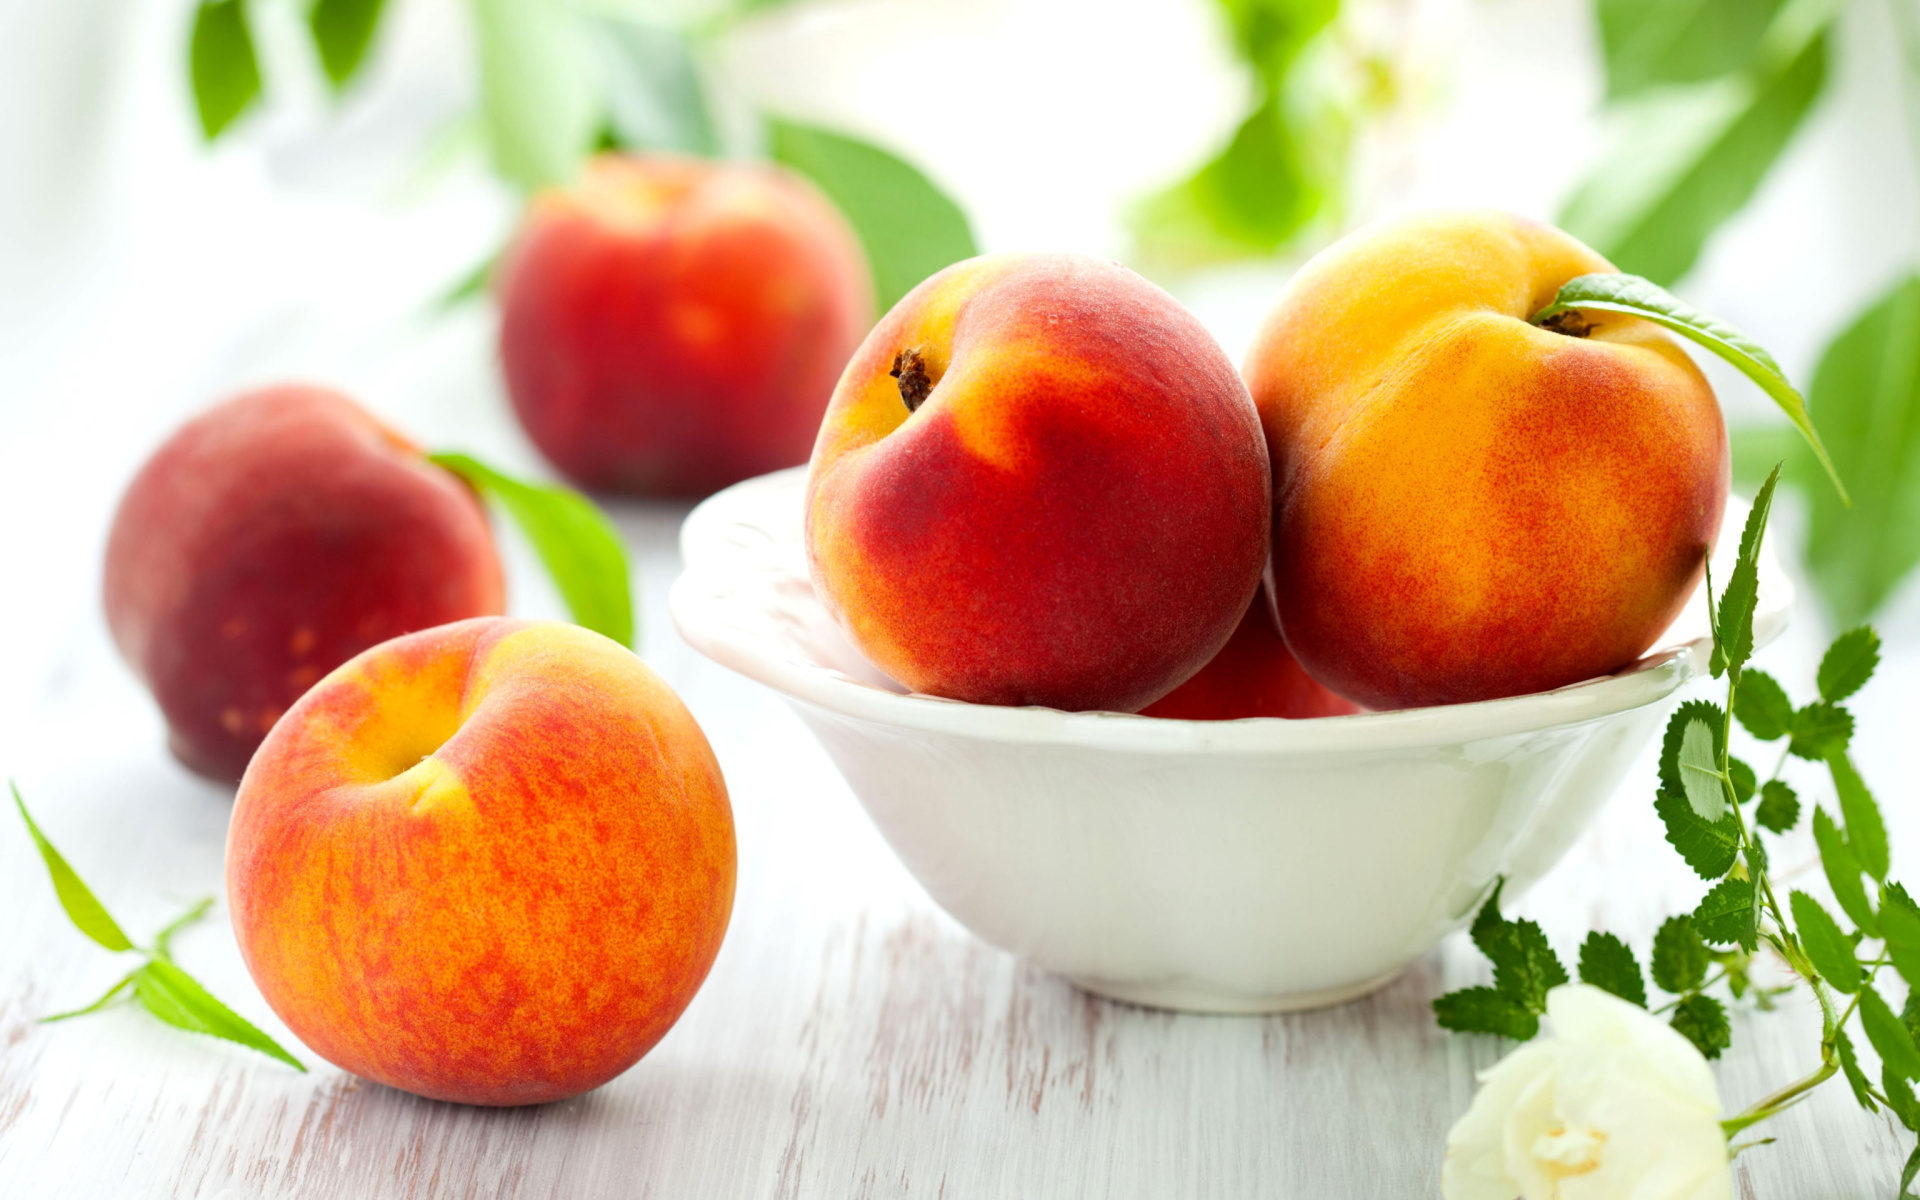 Peach: Packed with numerous health-promoting compounds, minerals, and vitamins. 1920x1200 HD Wallpaper.